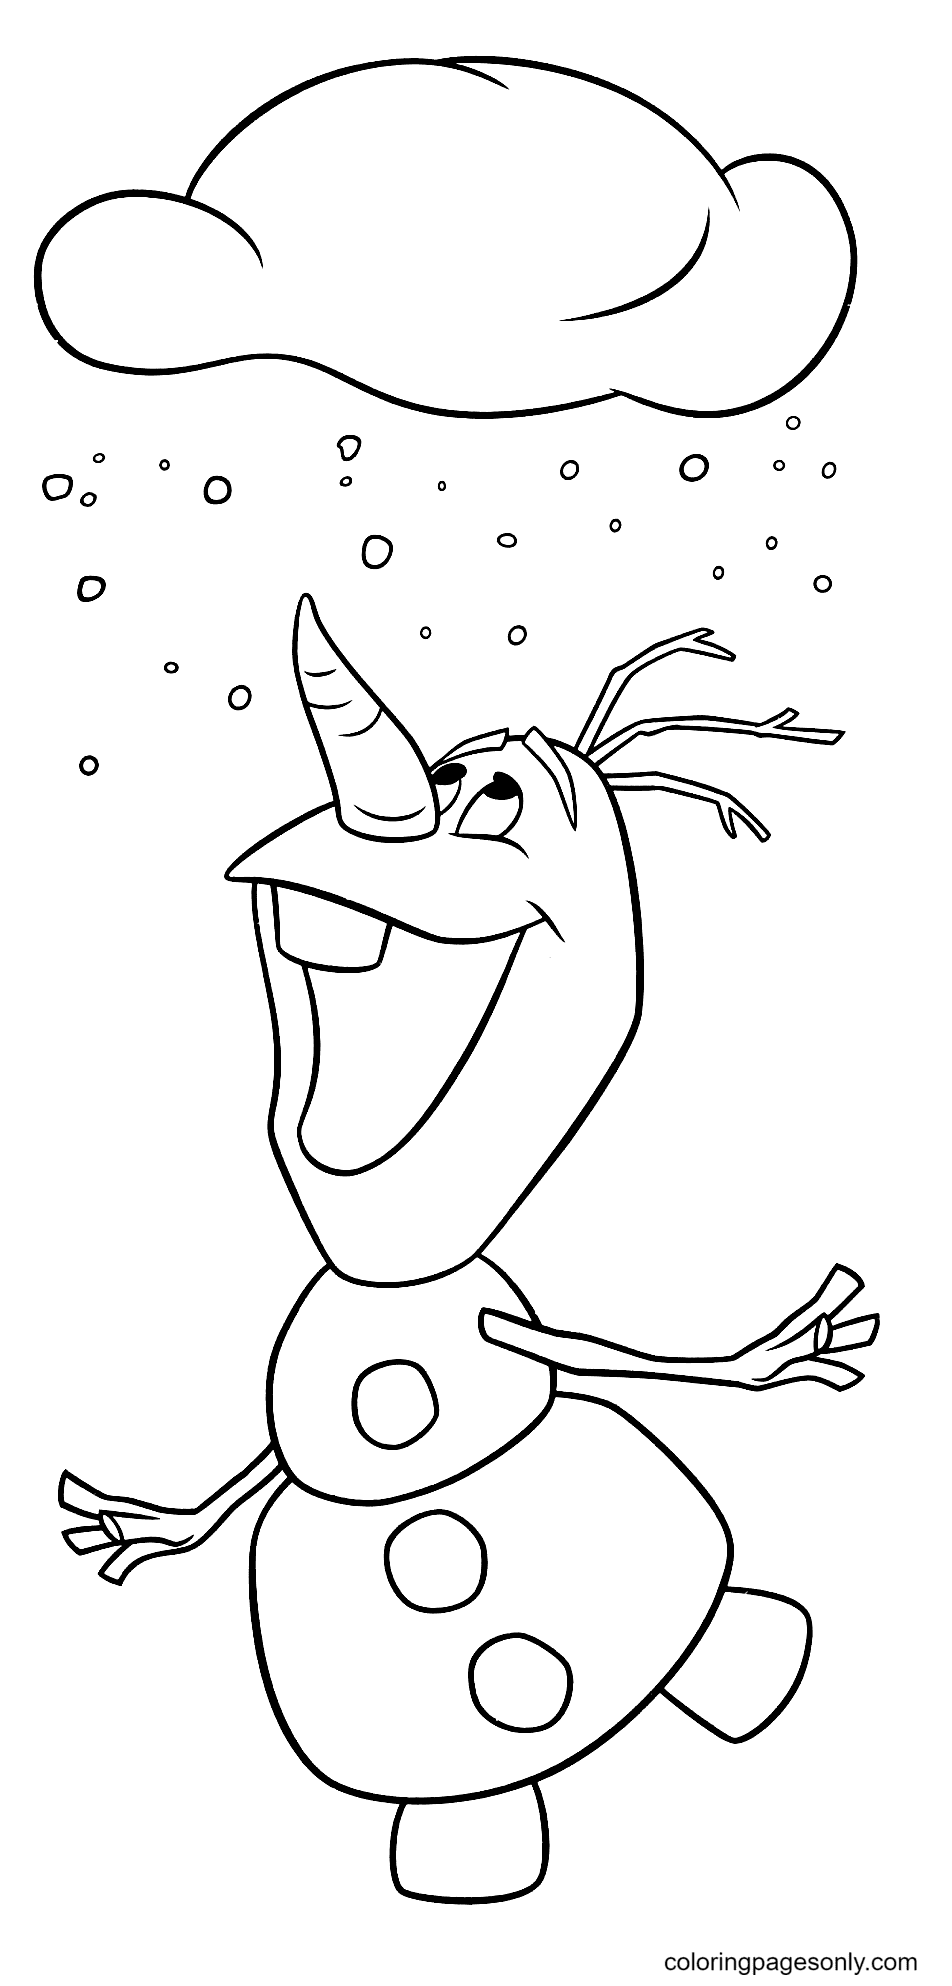 Cute Frozen Olaf Coloring Pages